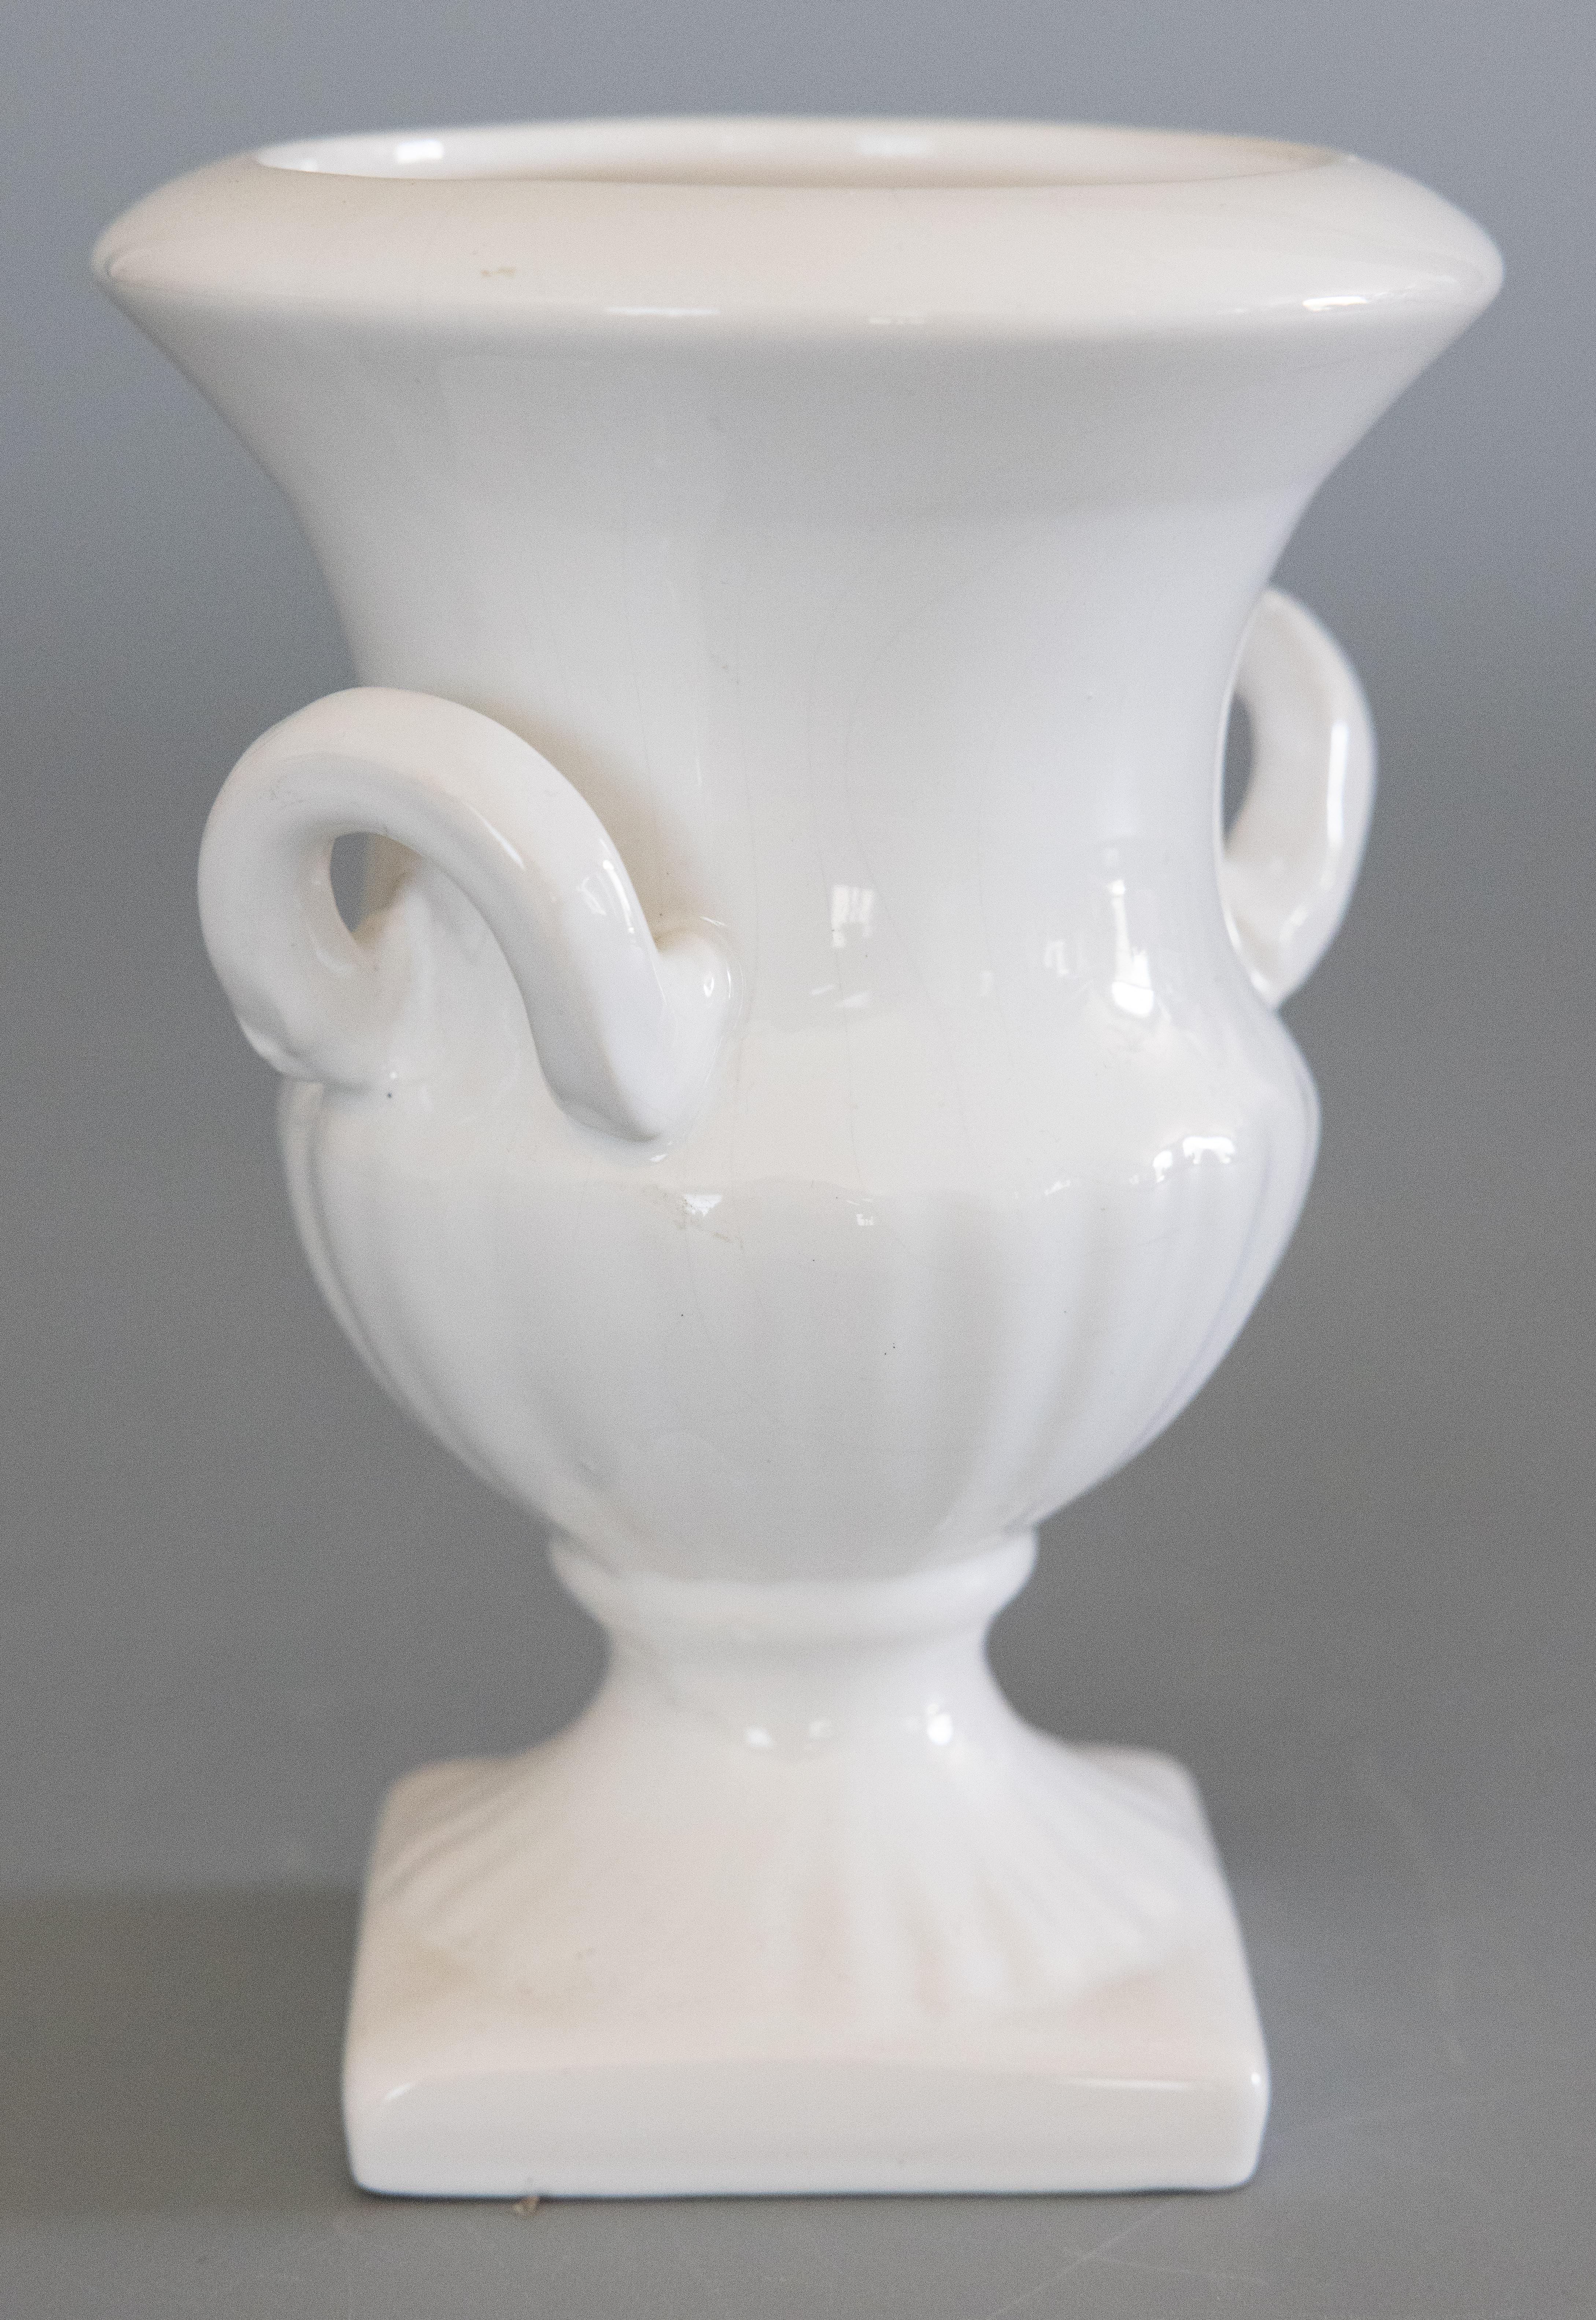 Petite Dutch Delft White Ironstone Urn Vase, circa 1950 In Good Condition For Sale In Pearland, TX